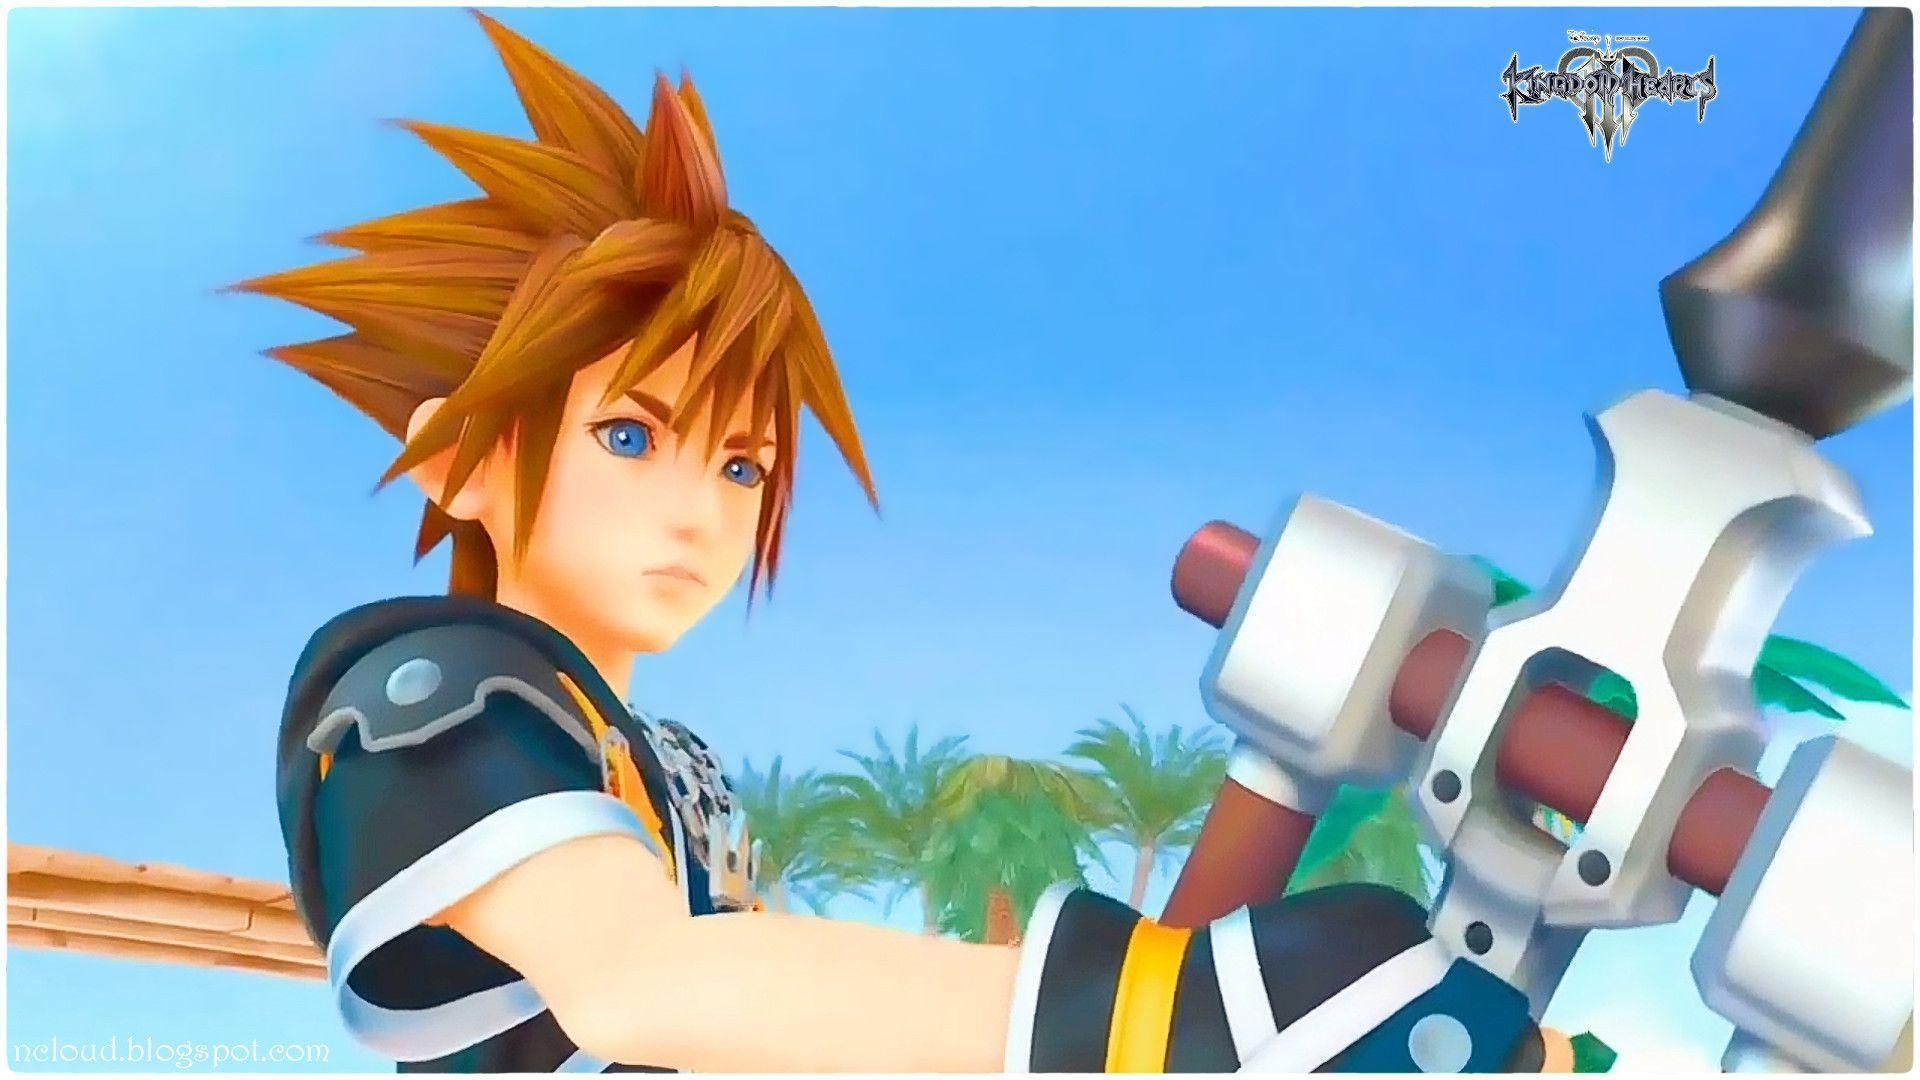 Games Movies Music Anime: Kingdom Hearts 3 Announced for PS4